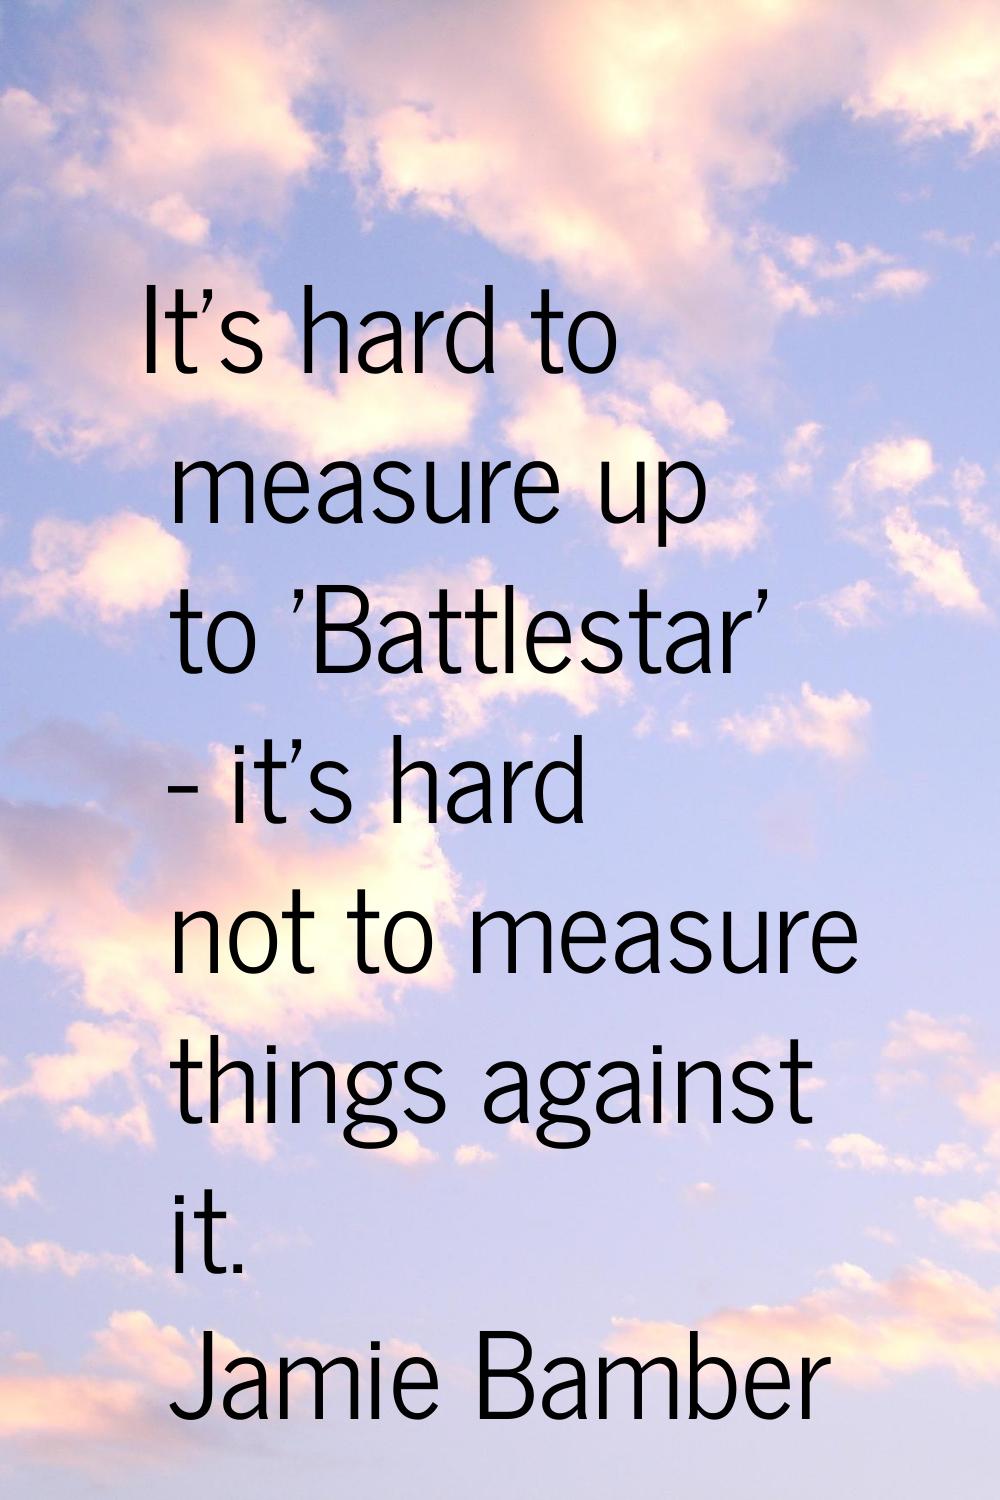 It's hard to measure up to 'Battlestar' - it's hard not to measure things against it.